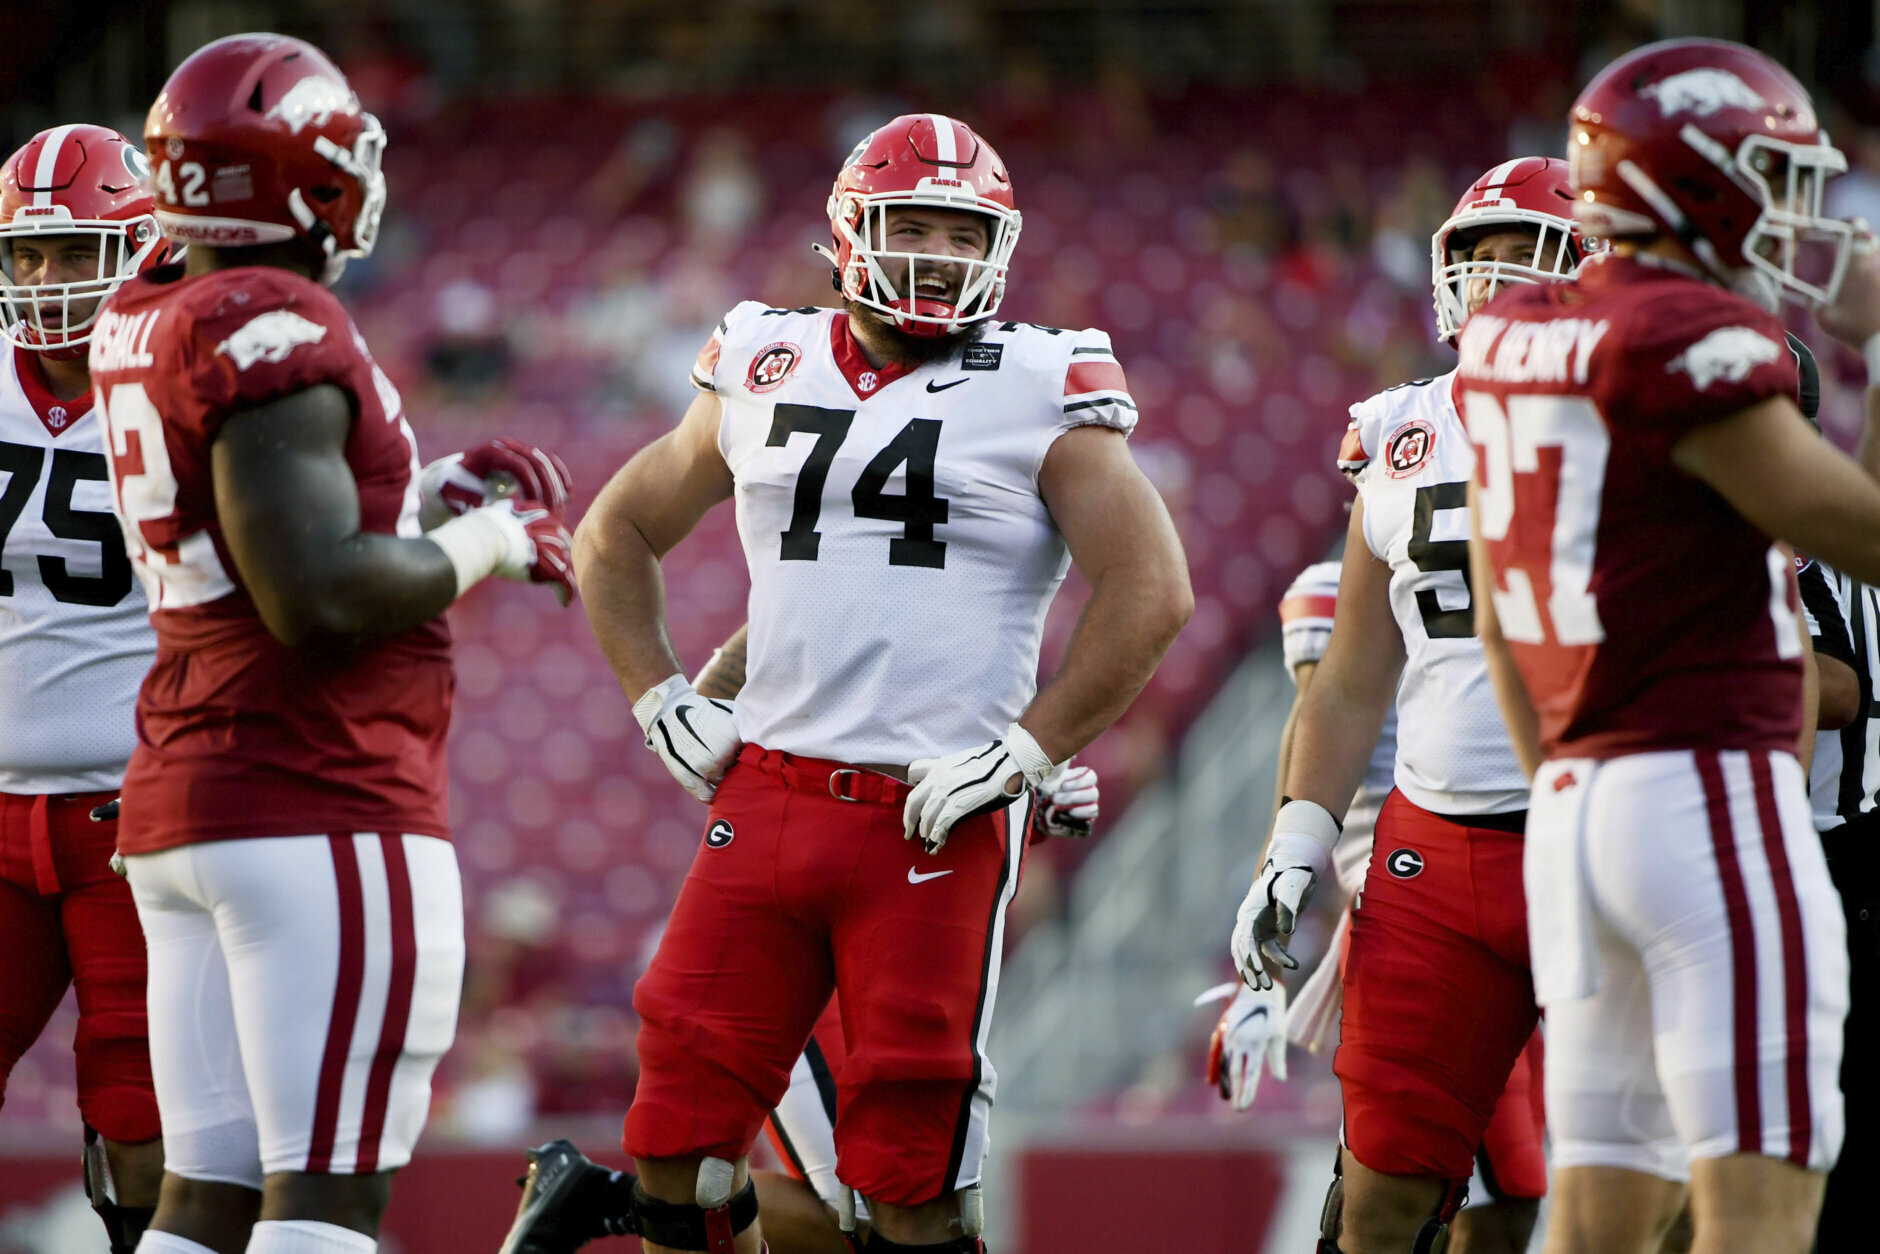 Georgia offensive lineman Ben Cleveland (74) against Arkansas during an NCAA college football game in Fayetteville, Ark. Saturday, Sept. 26, 2020. (AP Photo/Michael Woods)